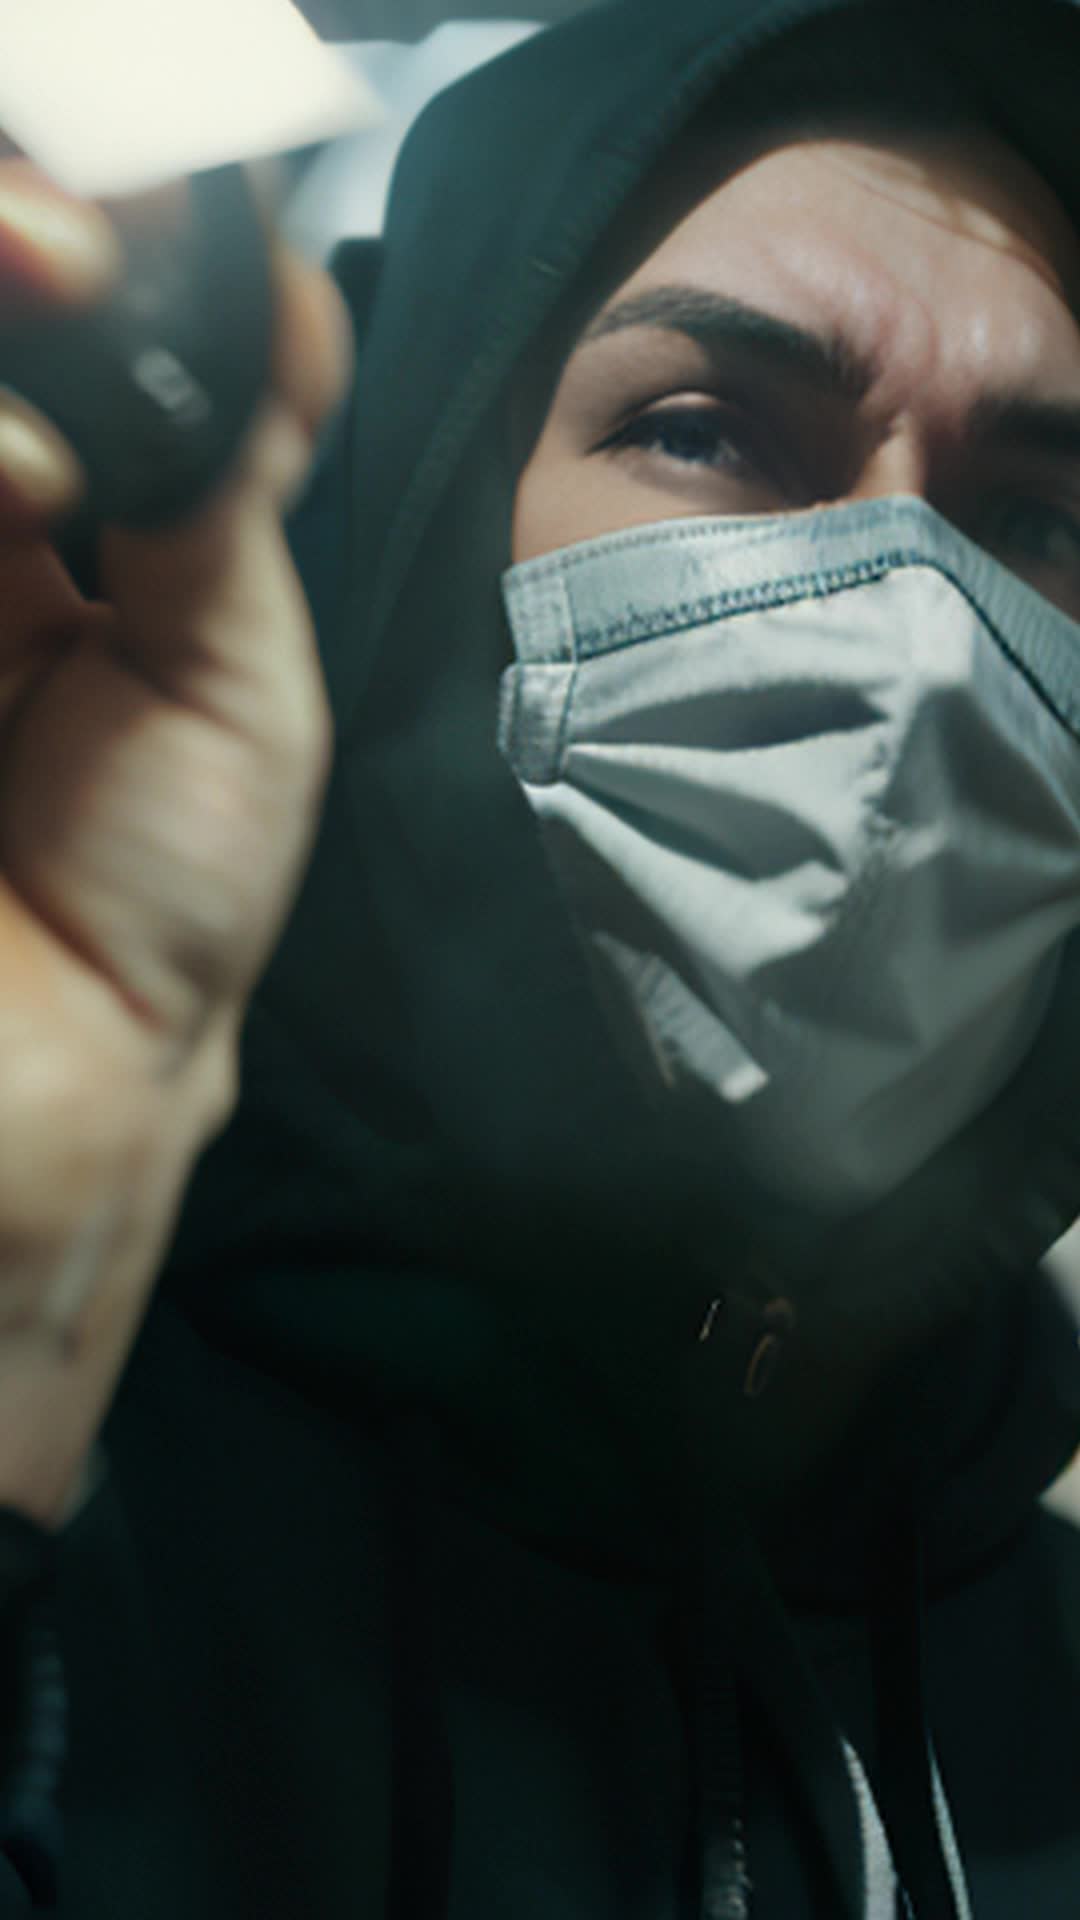 Mysterious person, black hoodie, white mask, slow walk, picks up microphone, dimly lit room, dramatic shadows, moody atmosphere, closeup of hand reaching microphone, suspenseful, steady camera angle, cinematic focus, detailed and sharp, tensionfilled moment